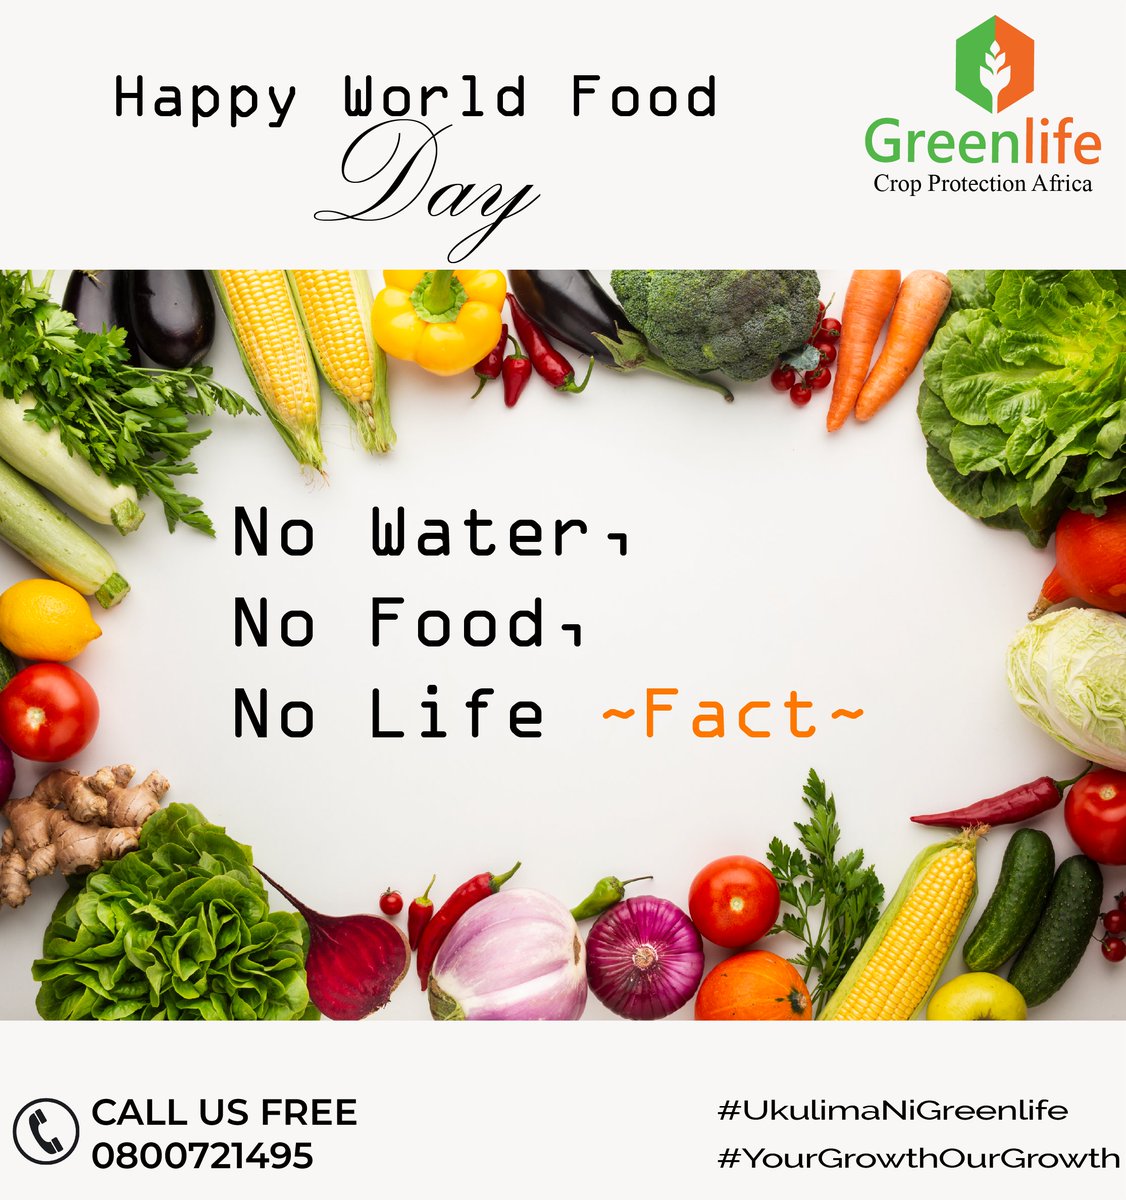 HAPPY WORLD'S FOOD DAY. 'Water is Life, Water is Food, Leave no one Behind' 'Saving our planet, lifting people out of poverty, advancing economic growth... these are one and the same fight. Think about it, Call us 0800721495 #WaterIsLife #UkulimaNiGreenlife #YourGrowthOurGrowth